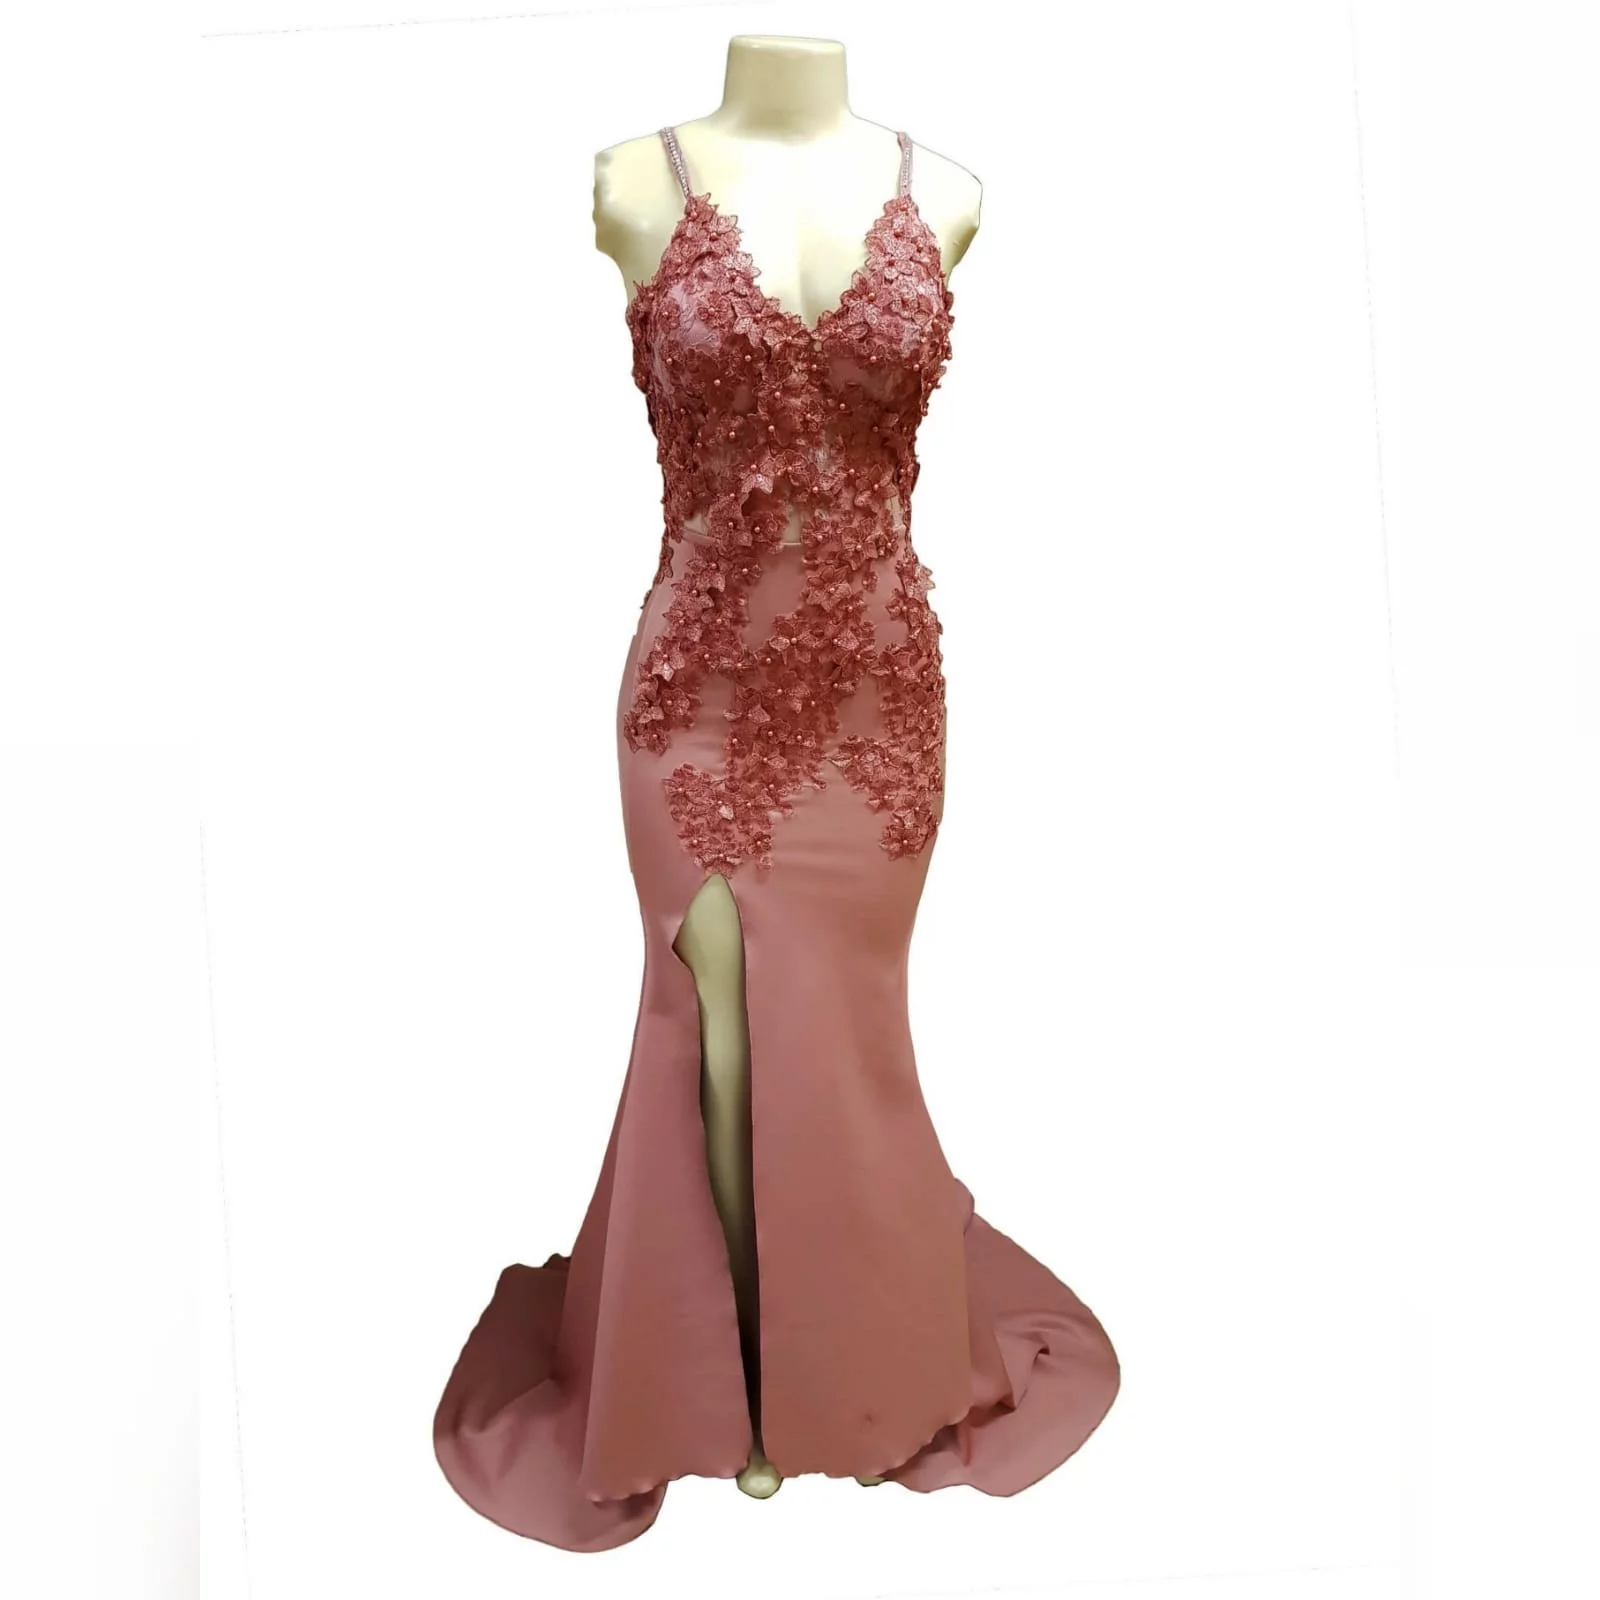 Pink elegant matric dance dress 4 choose a pink elegant matric dance dress for your special event. A colour that inspires kindness, sensitivity and warmth. This colour on this 3d shine lace long sexy dress creates a feel good mood, and that all will be amazing for your special night.